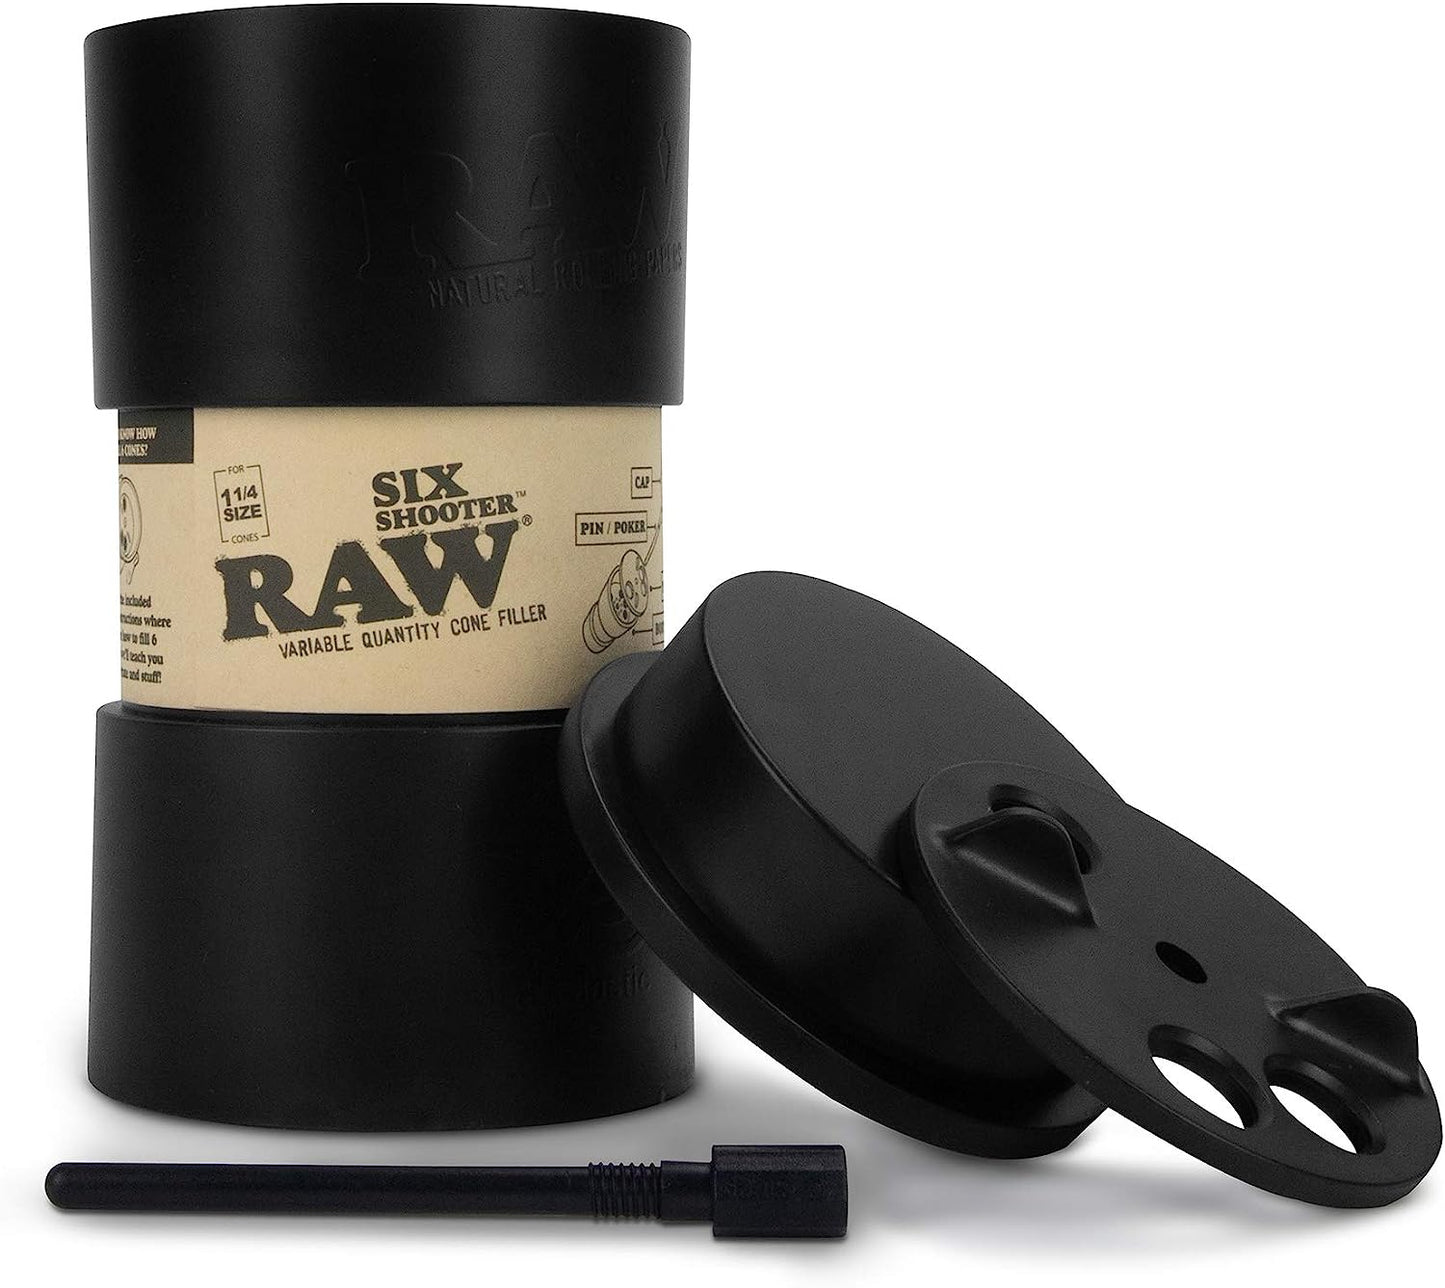 Raw Cone Filler 1 1/4 Six Shooter